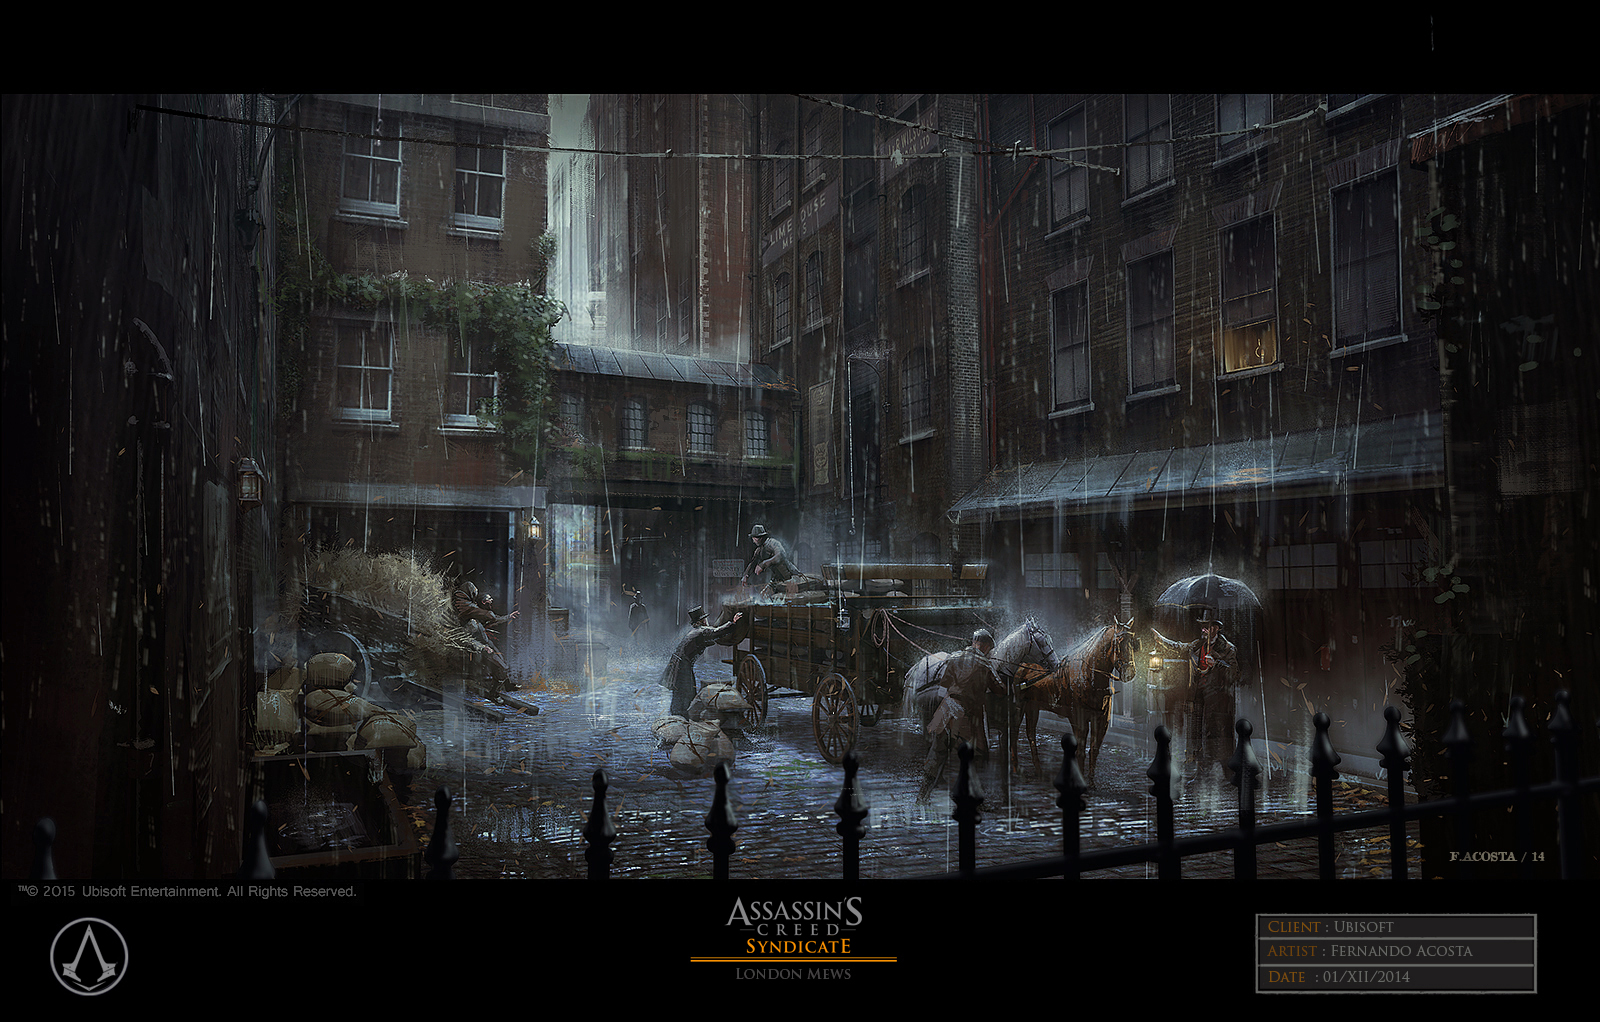 Assassin's Creed Syndicate Concept Art by Fernando Acosta | Concept Art